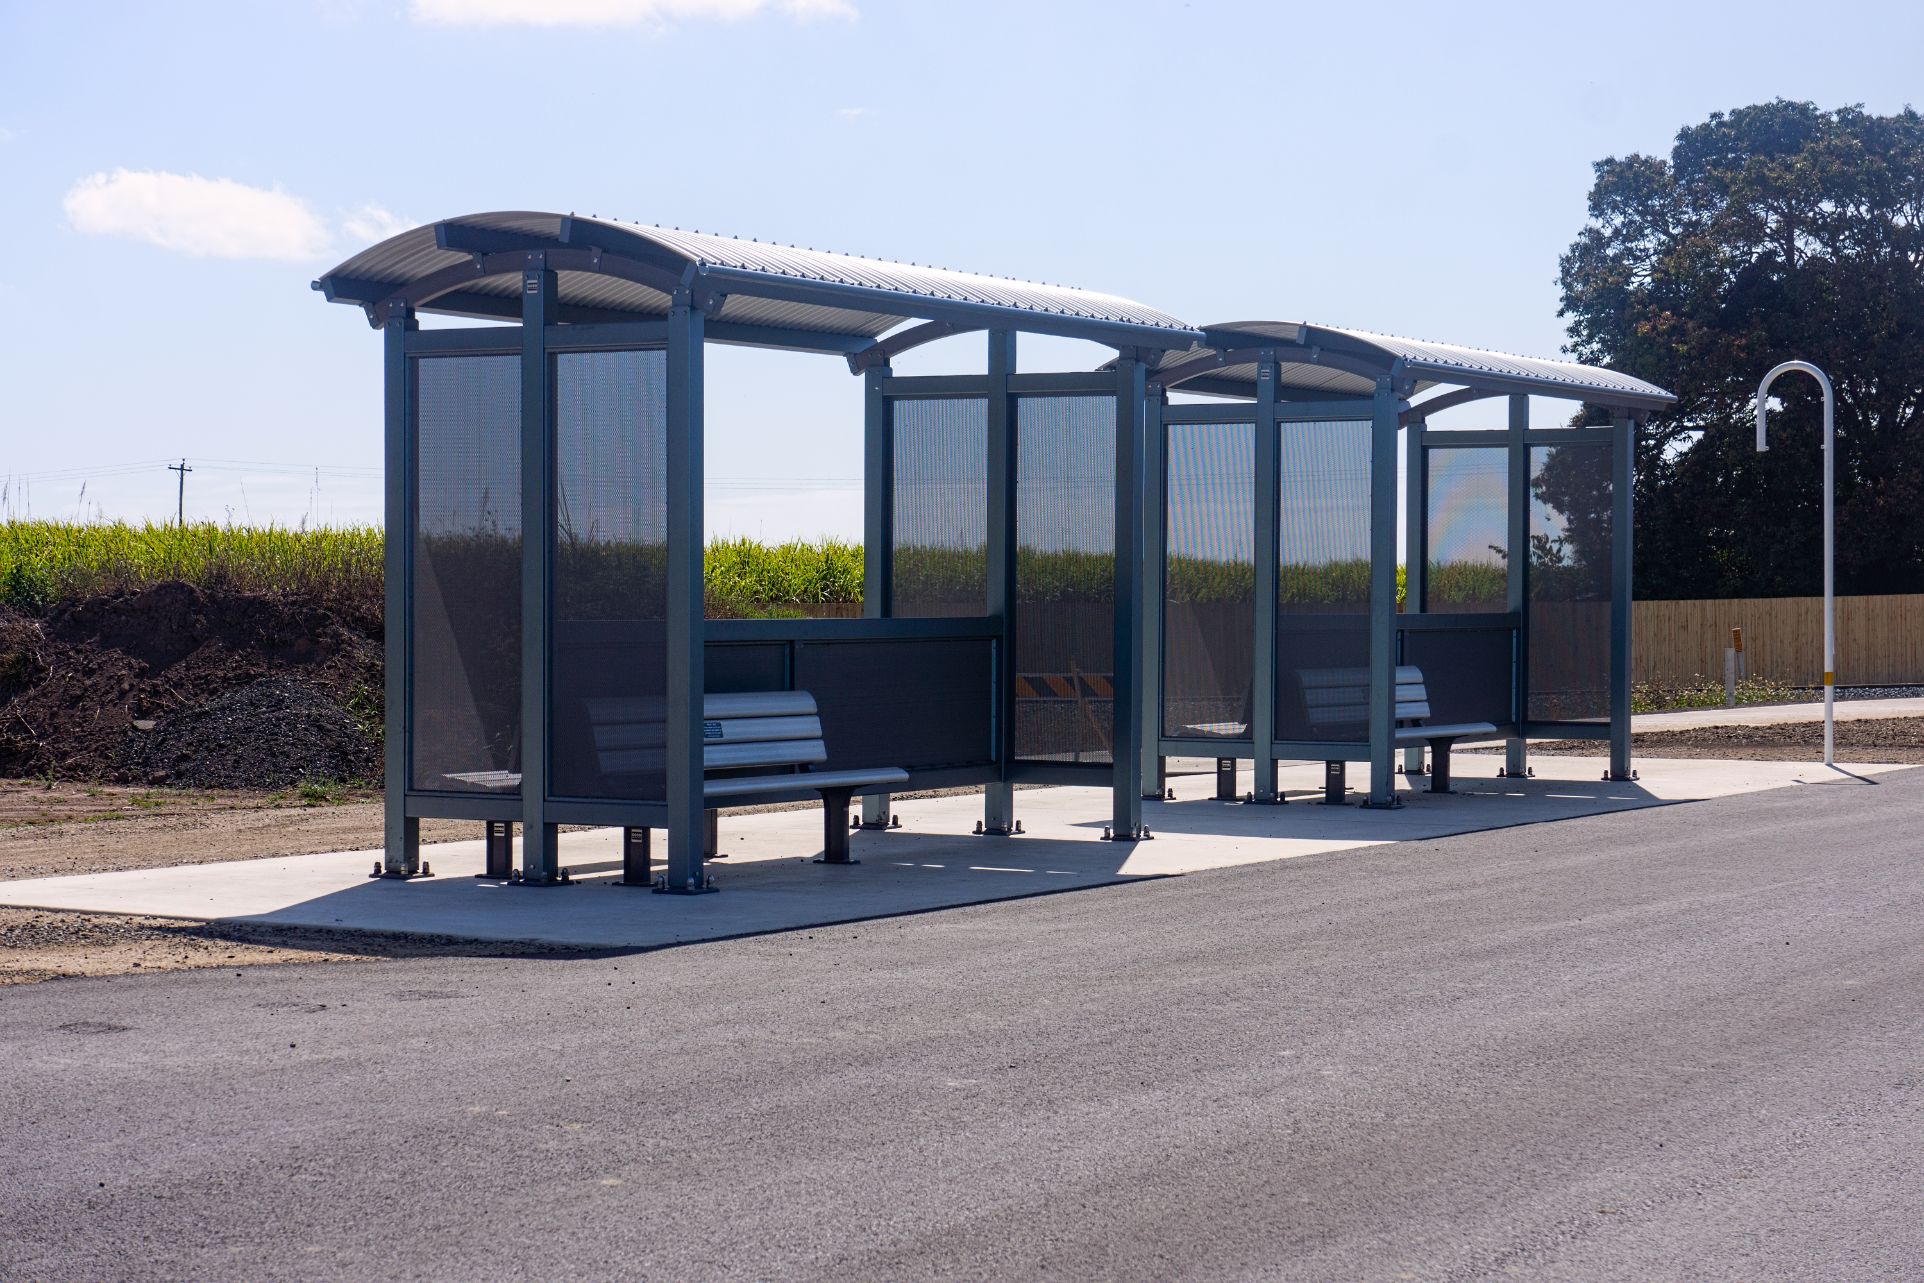 Why are bus shelters important?